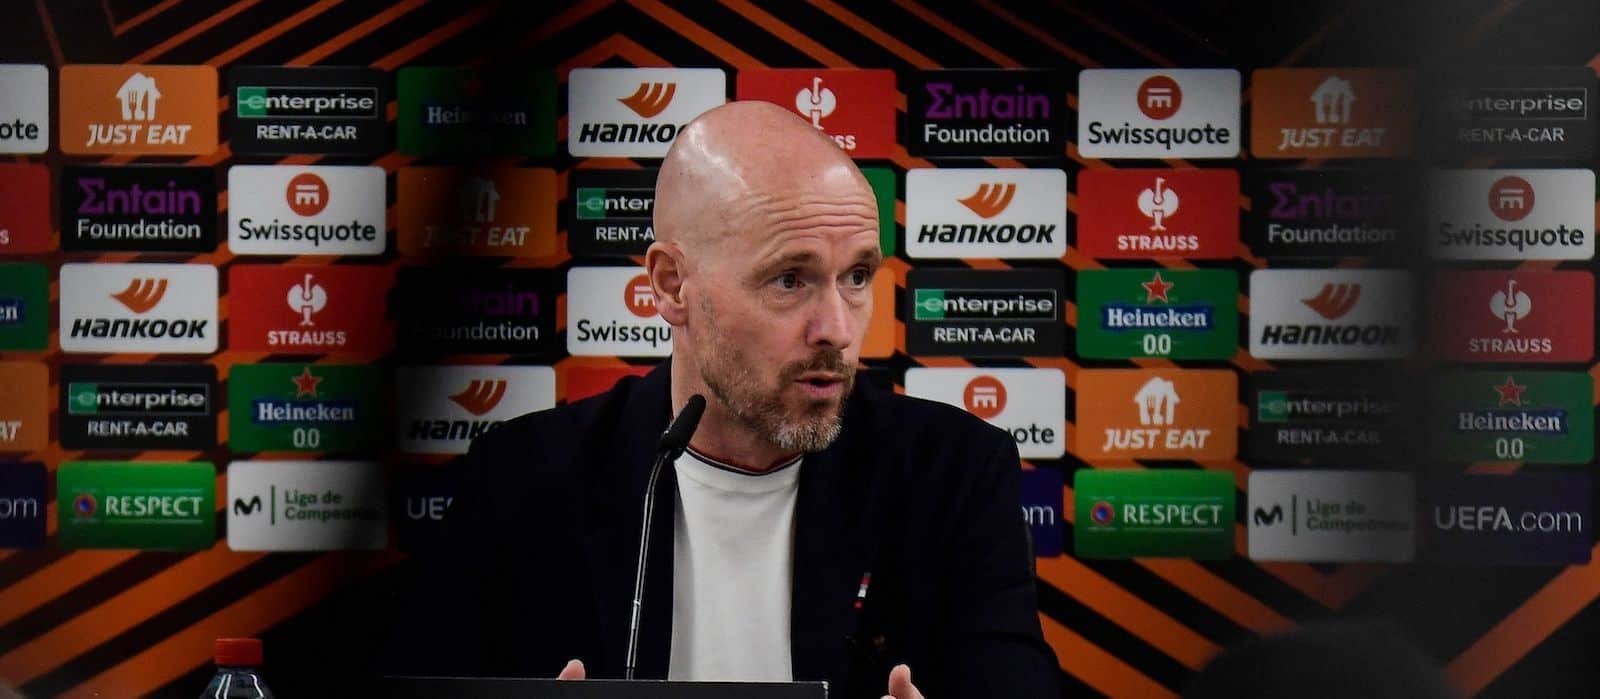 Erik ten Hag says Mason Mount back in squad to face Burnley tomorrow, otherwise unchanged – Man United News And Transfer News